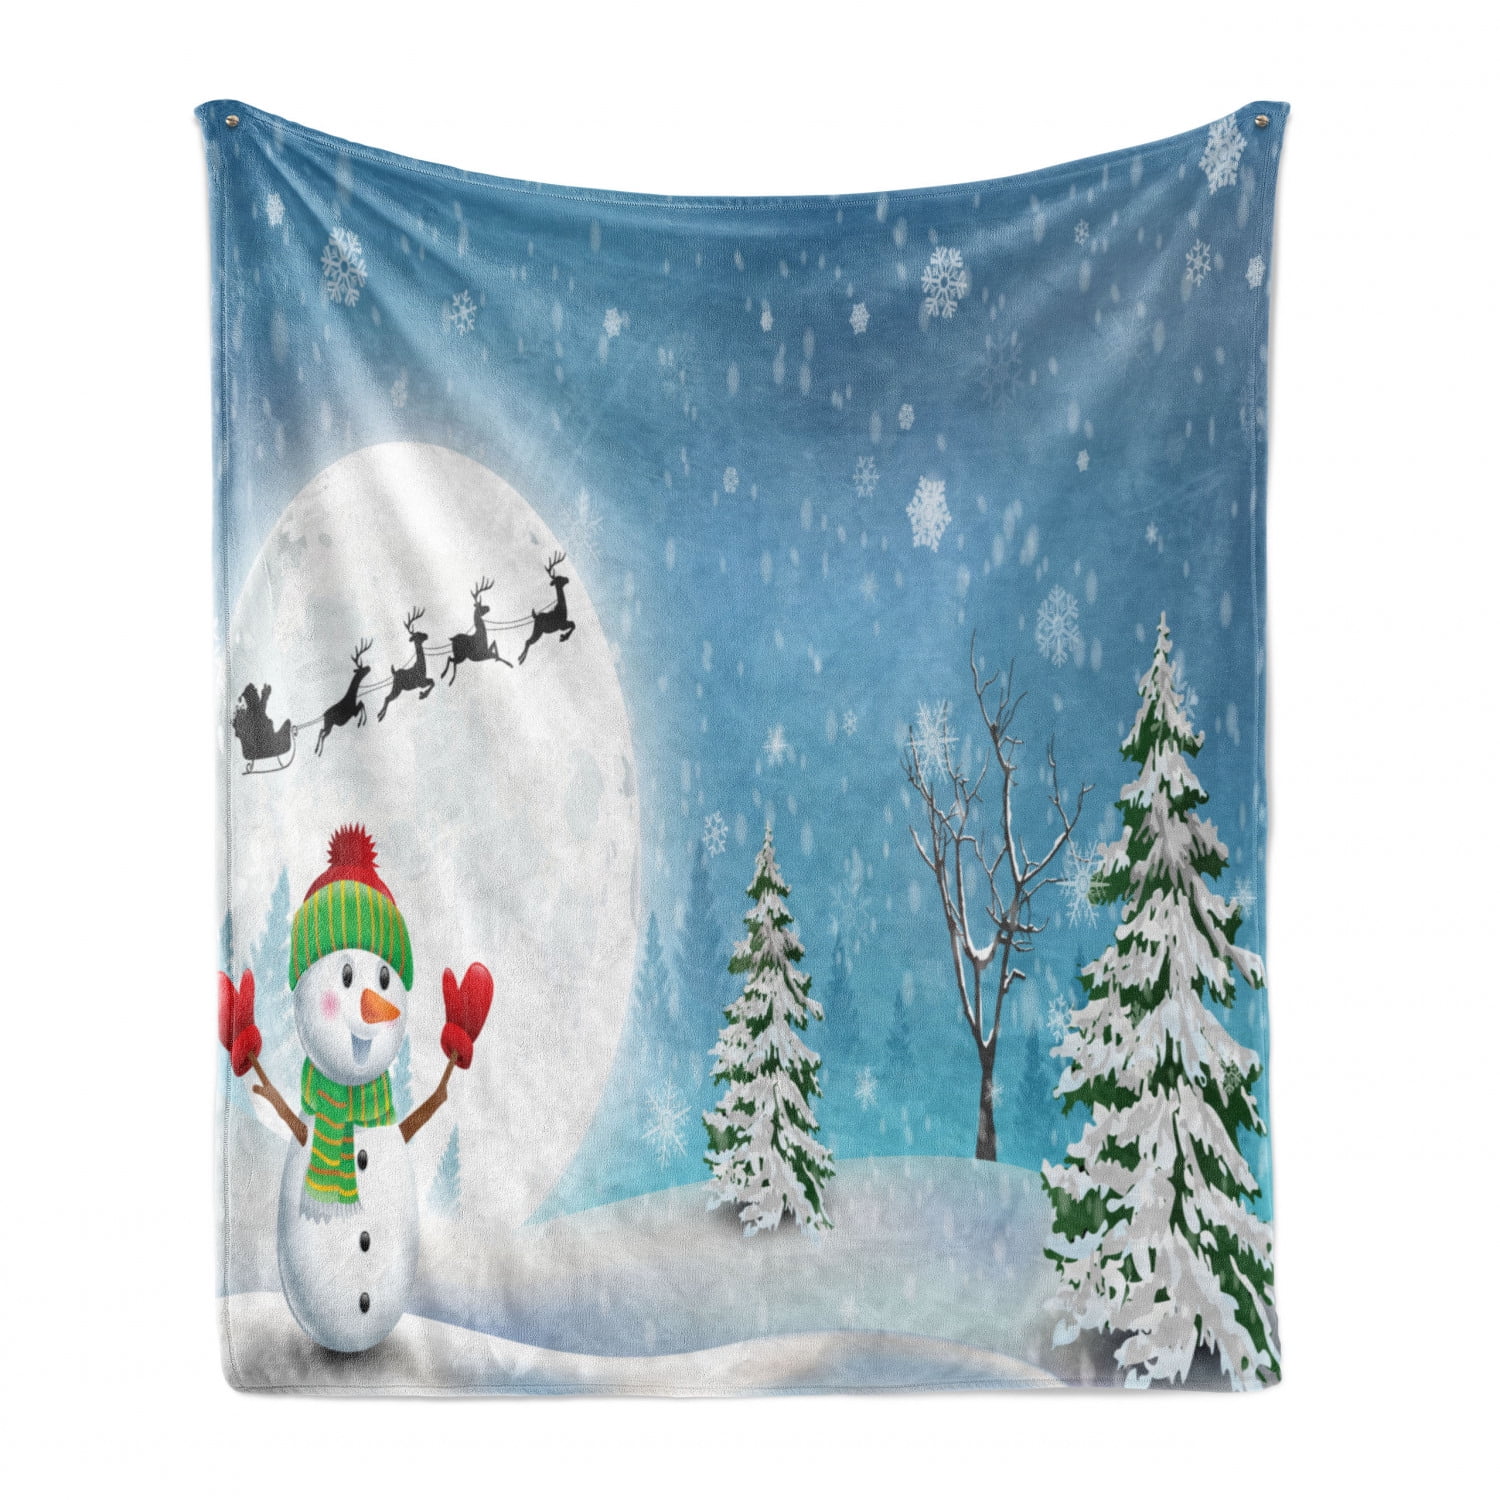 Santa Claus Snowman Reindeer Flannel Blanket Throw Blankets Cozy Fuzzy Ultra-Soft Micro Fleece Blanket for Bed Couch Living Room 60x50 Inch for Kids Adults 